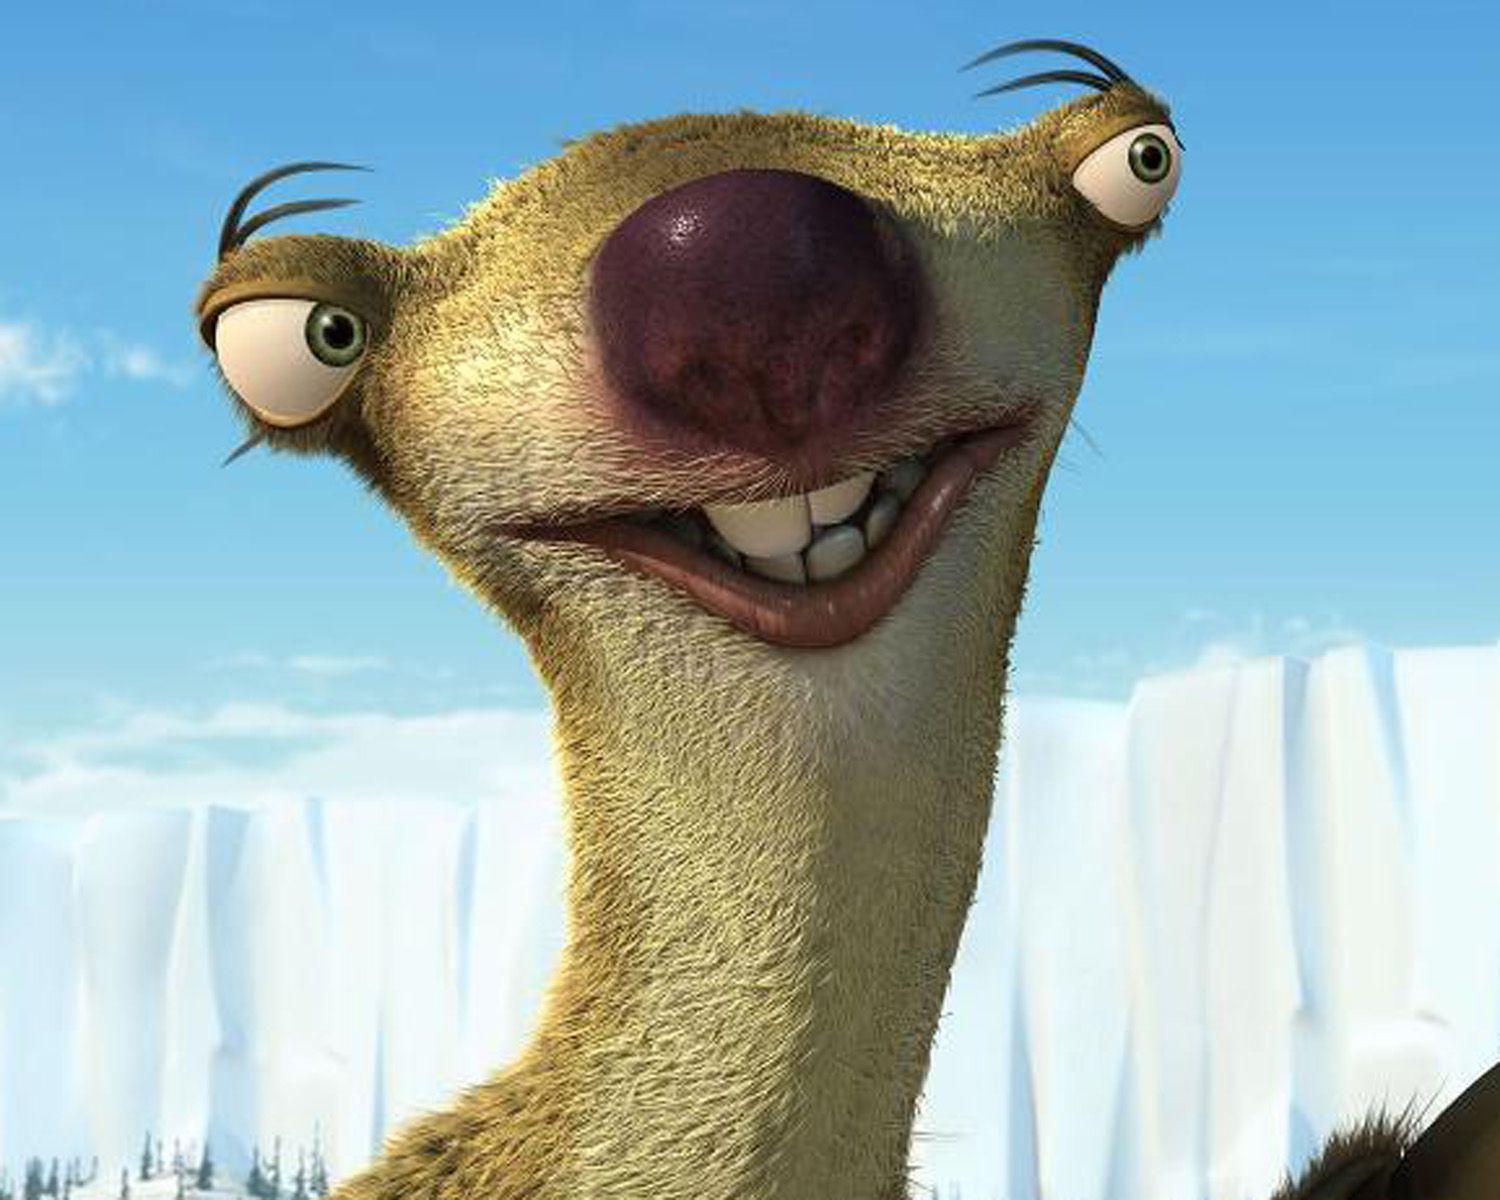 Ice Age: Sid image The Meltdown HD wallpapers and backgrounds photos.